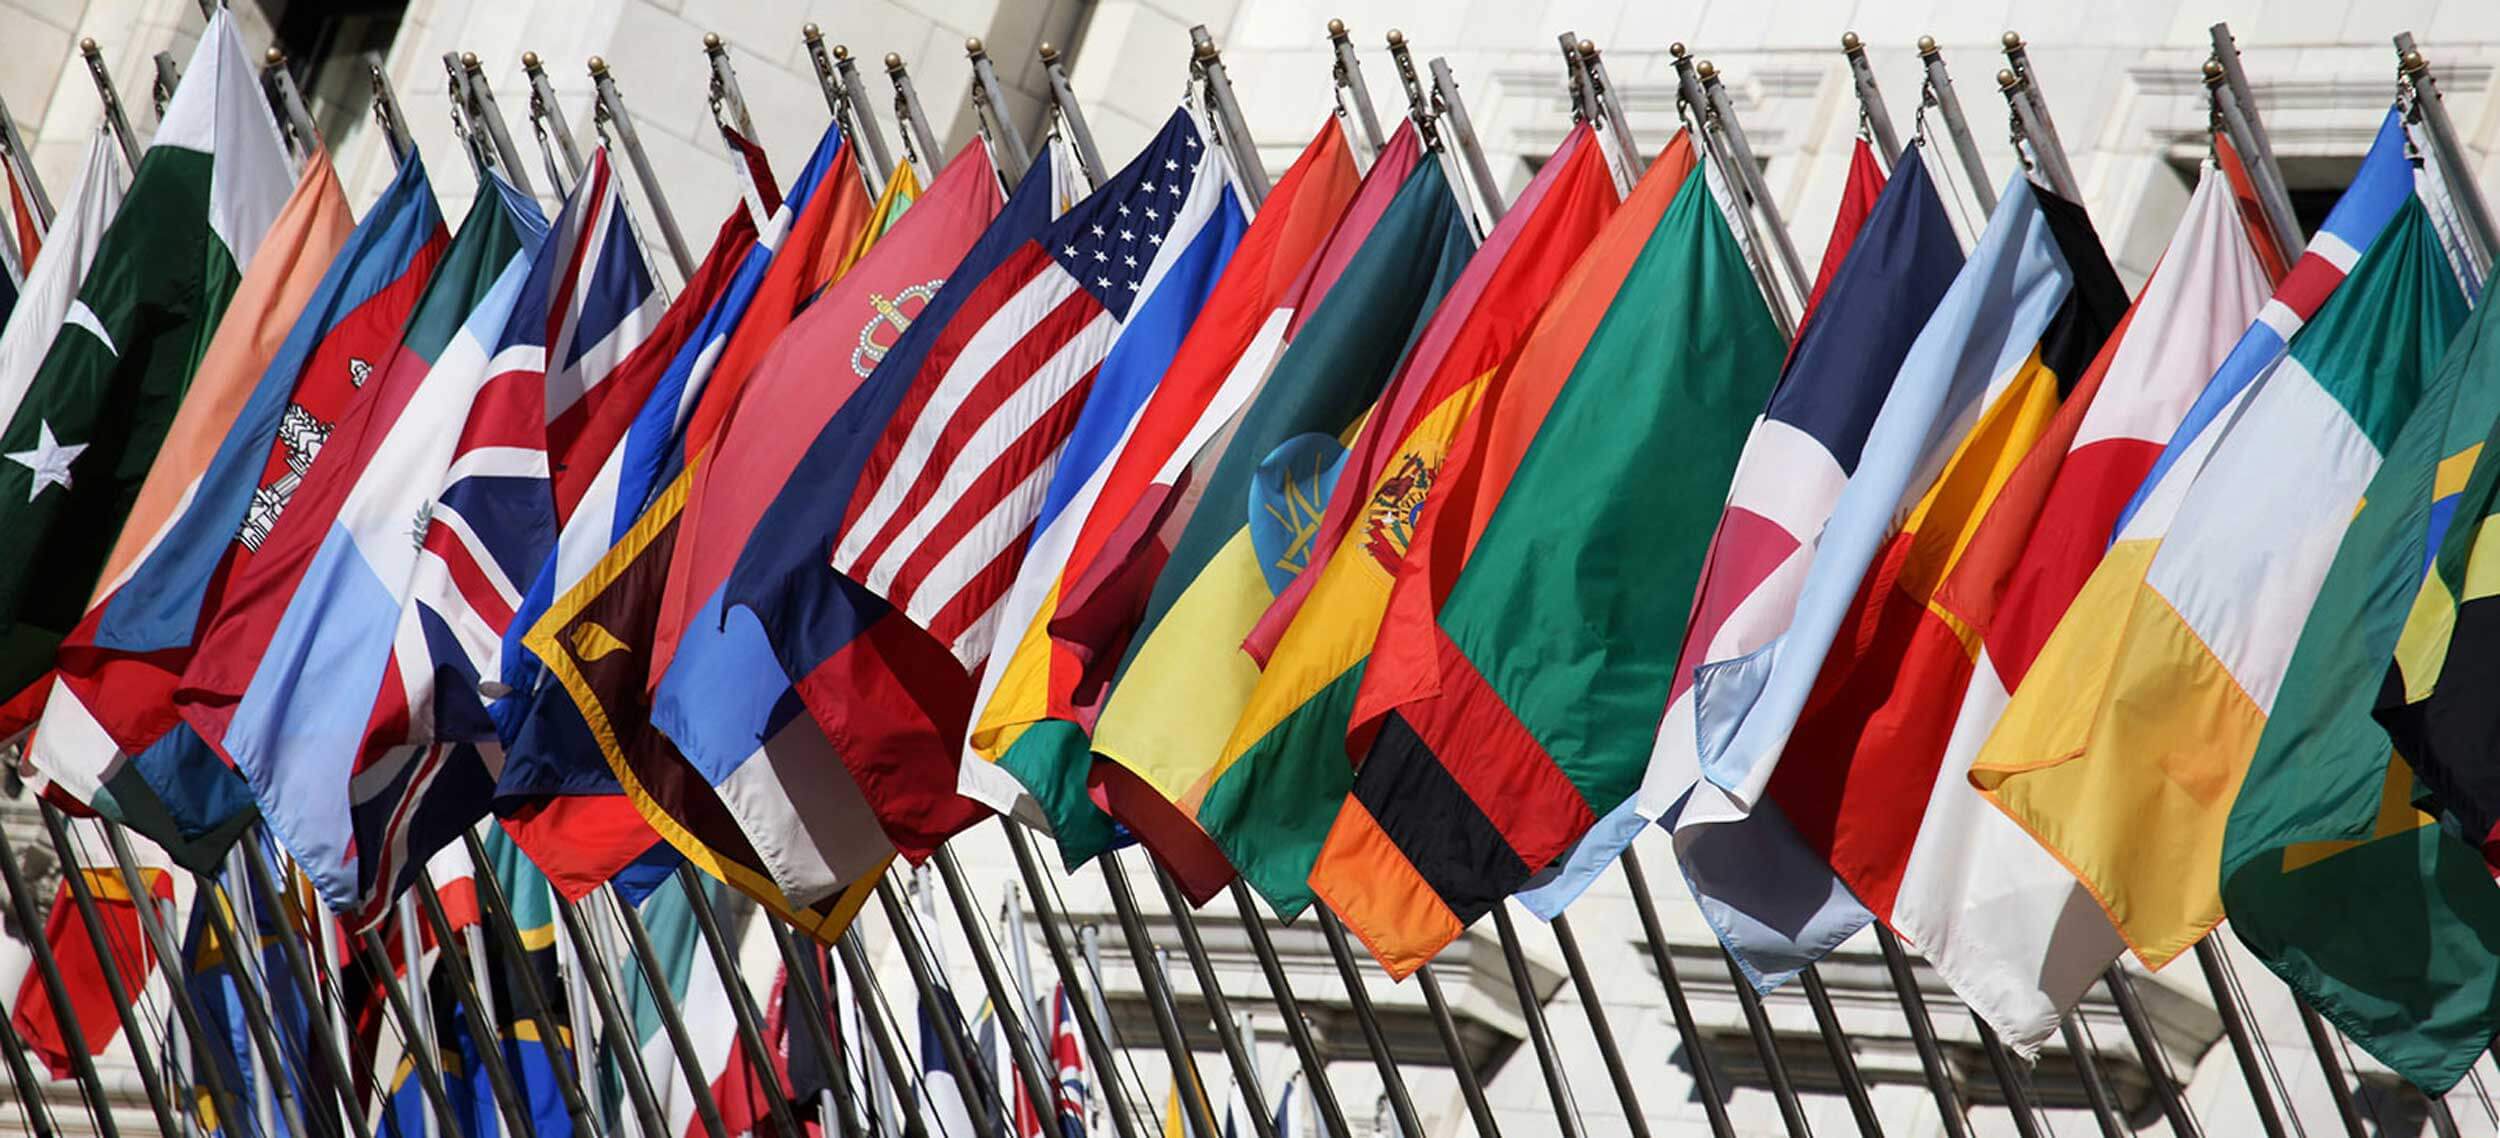 International flags on display outside of a government building